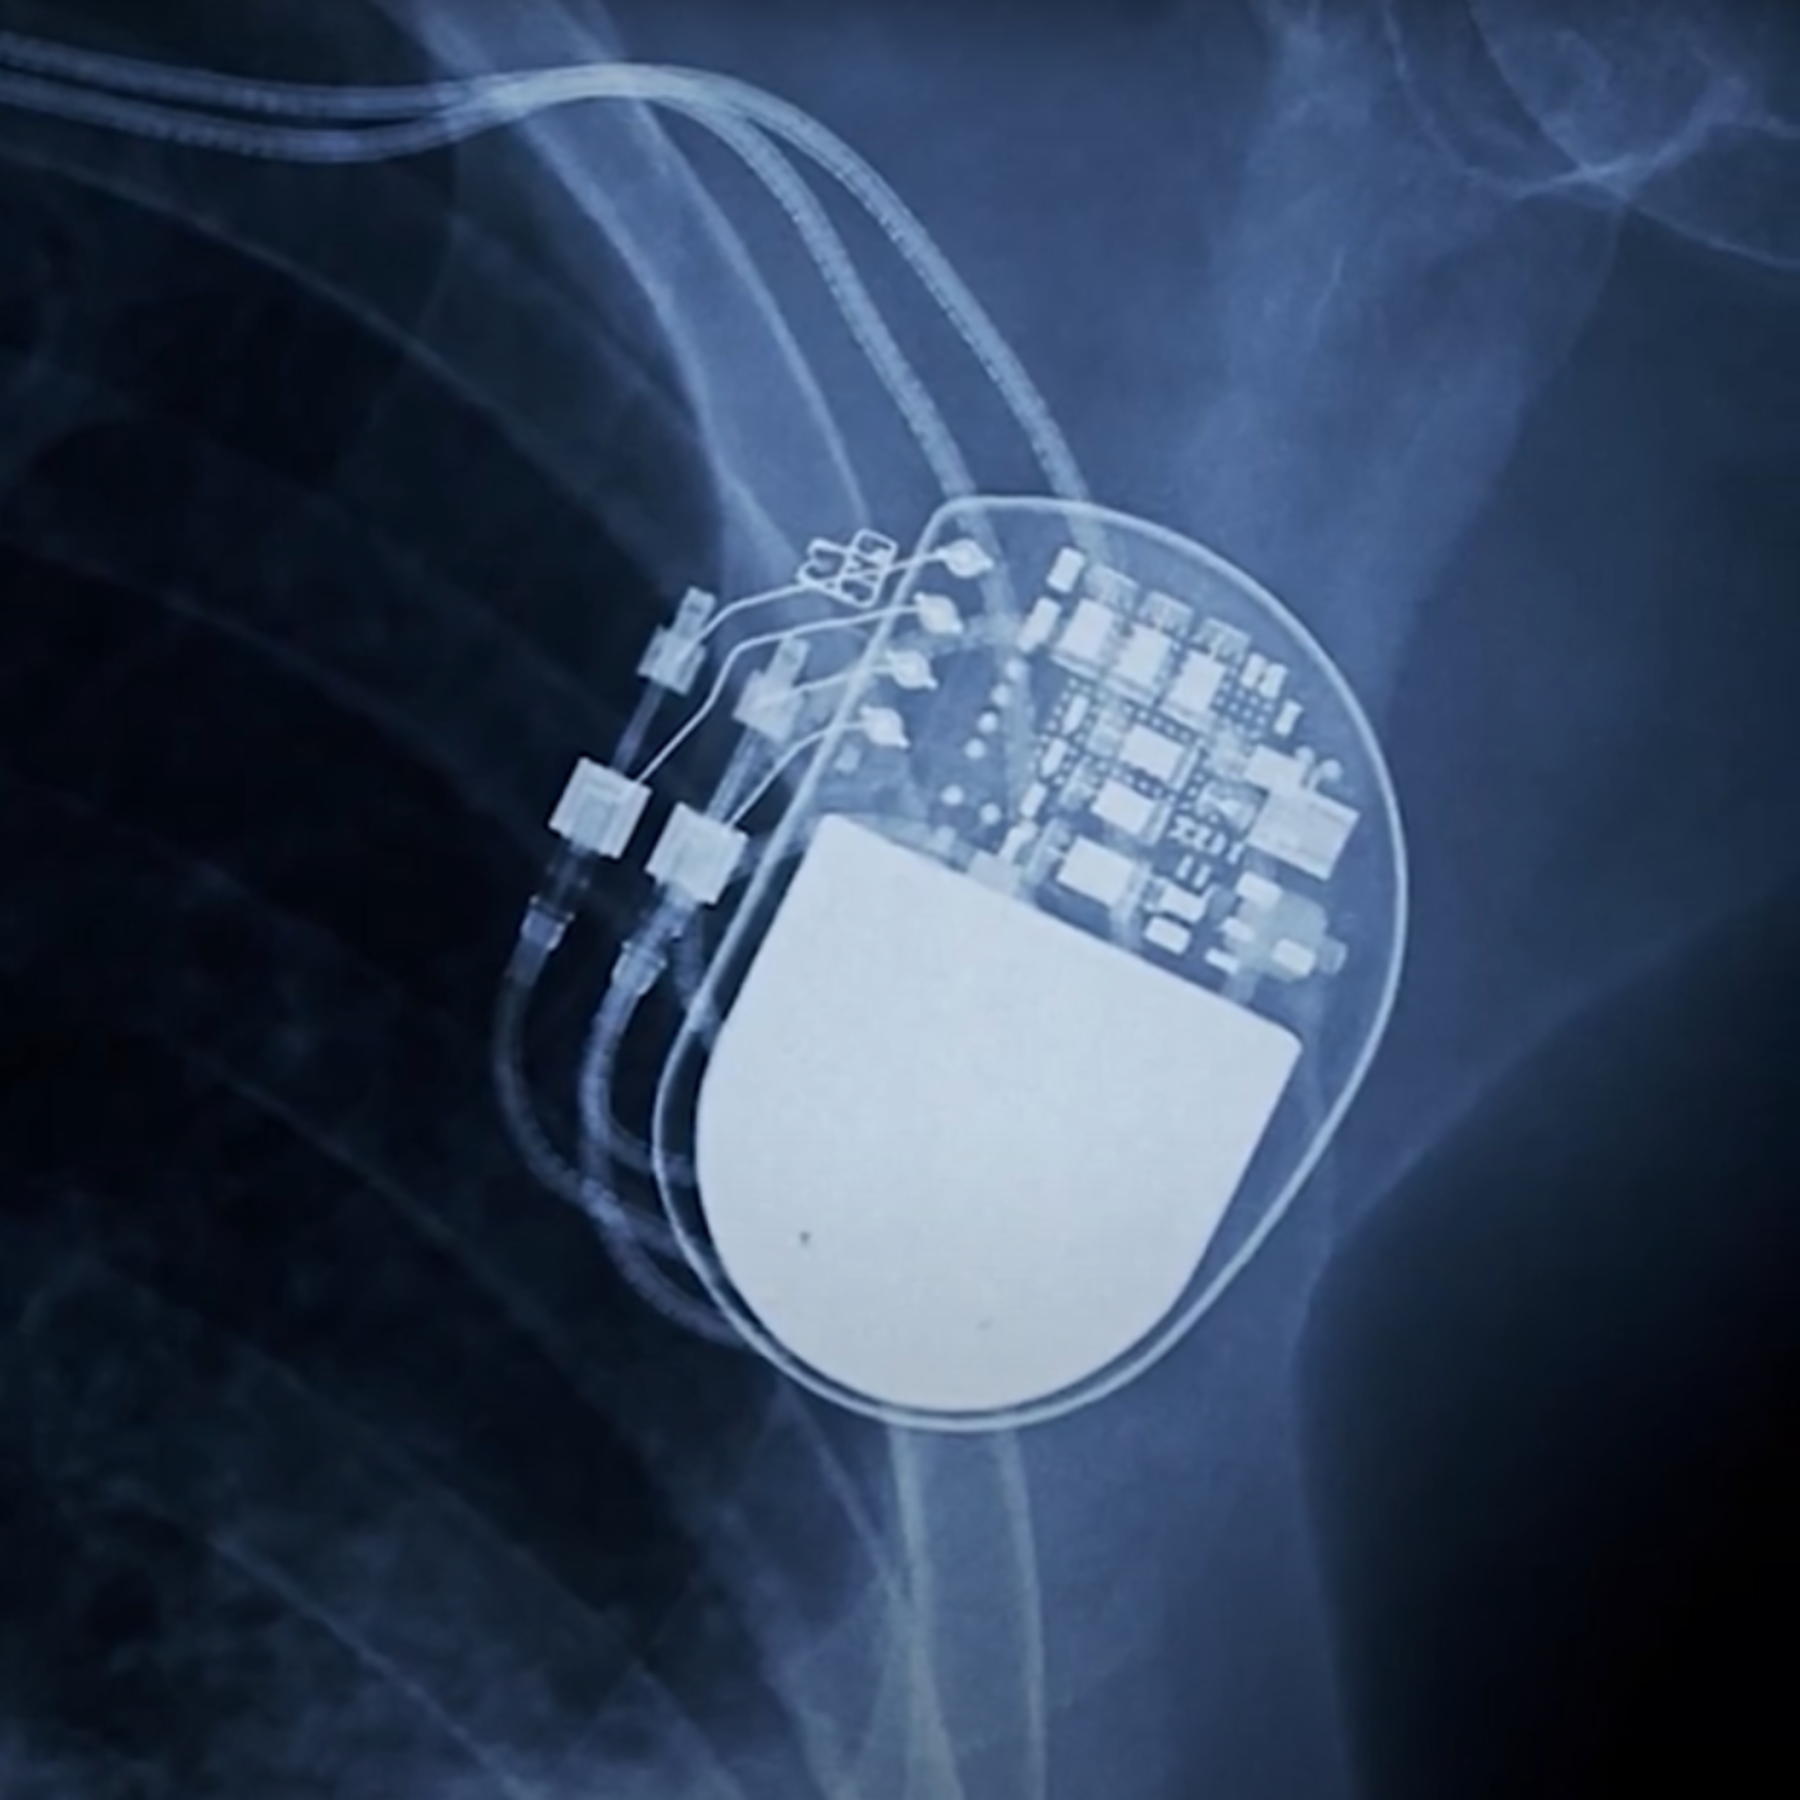 X-ray image of an implanted device in a human body. 